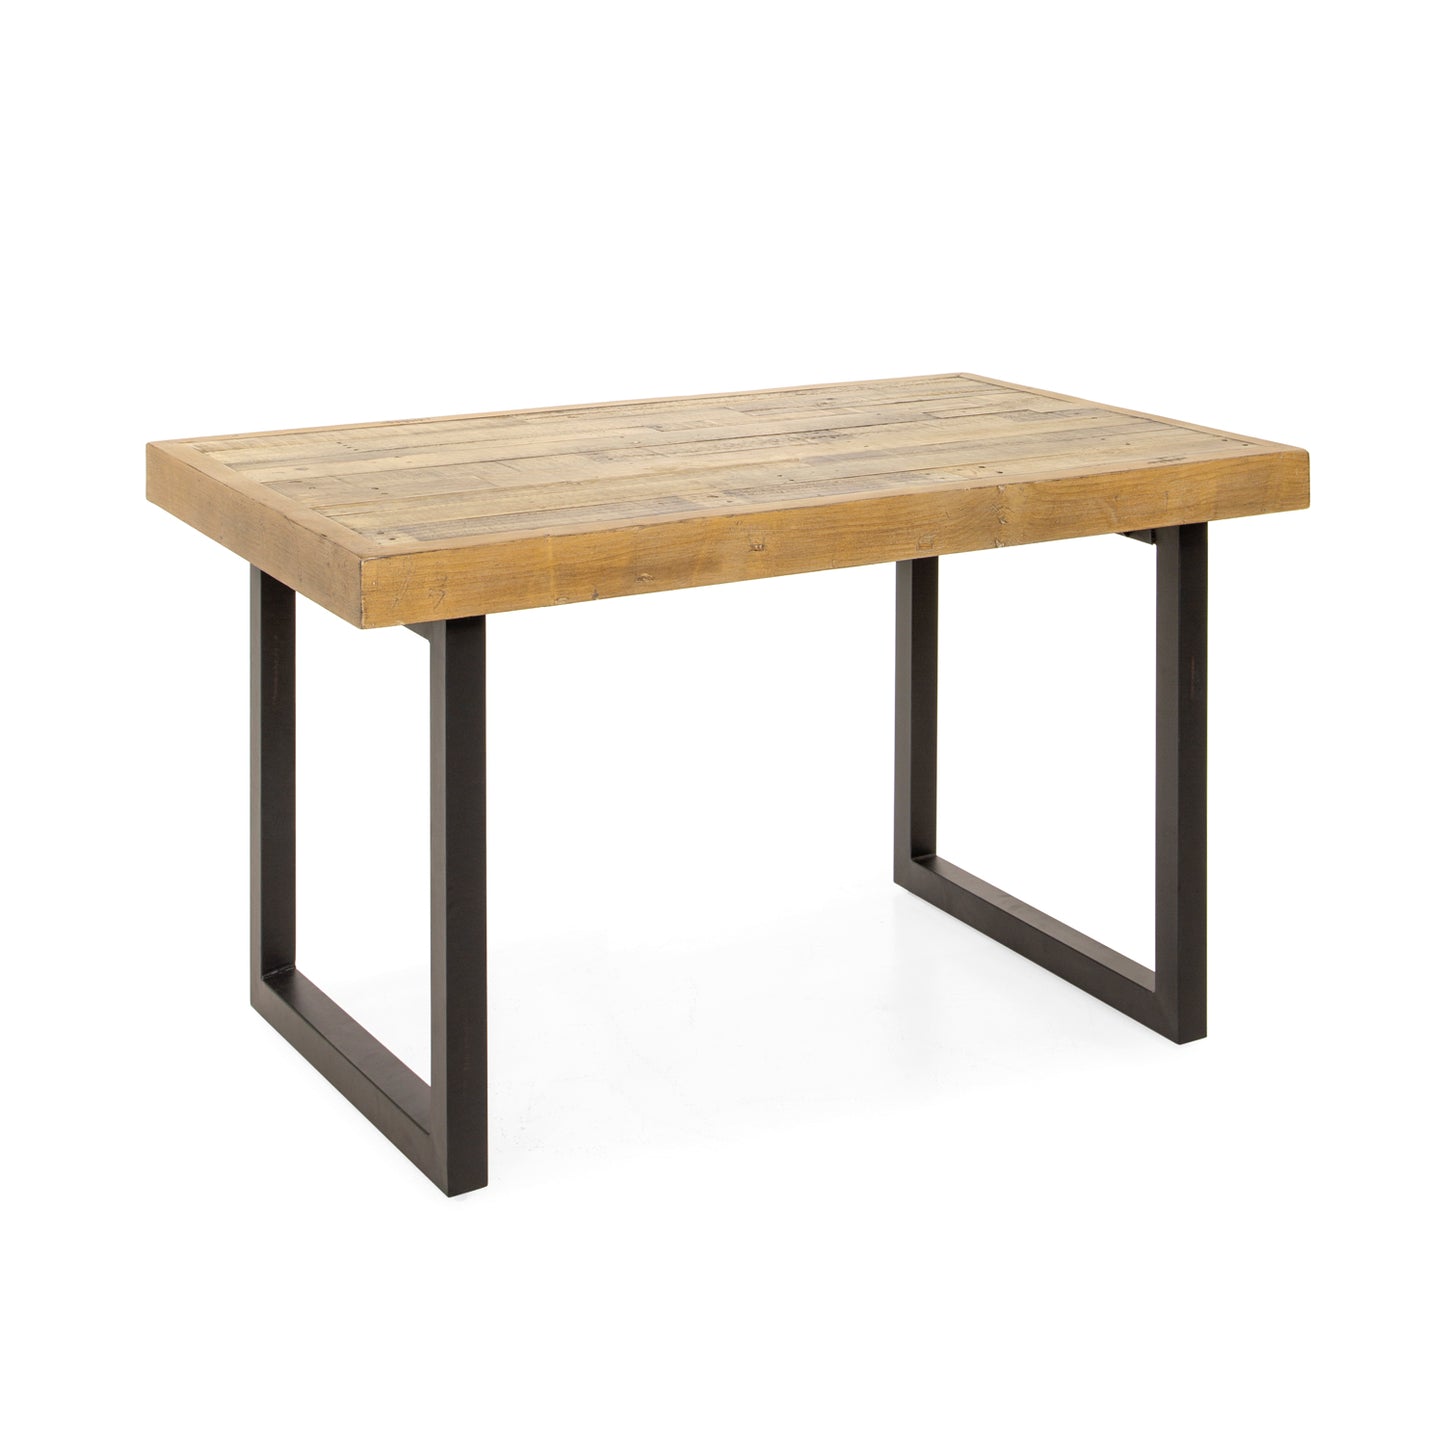 Colebrook Dining Table - 135cm